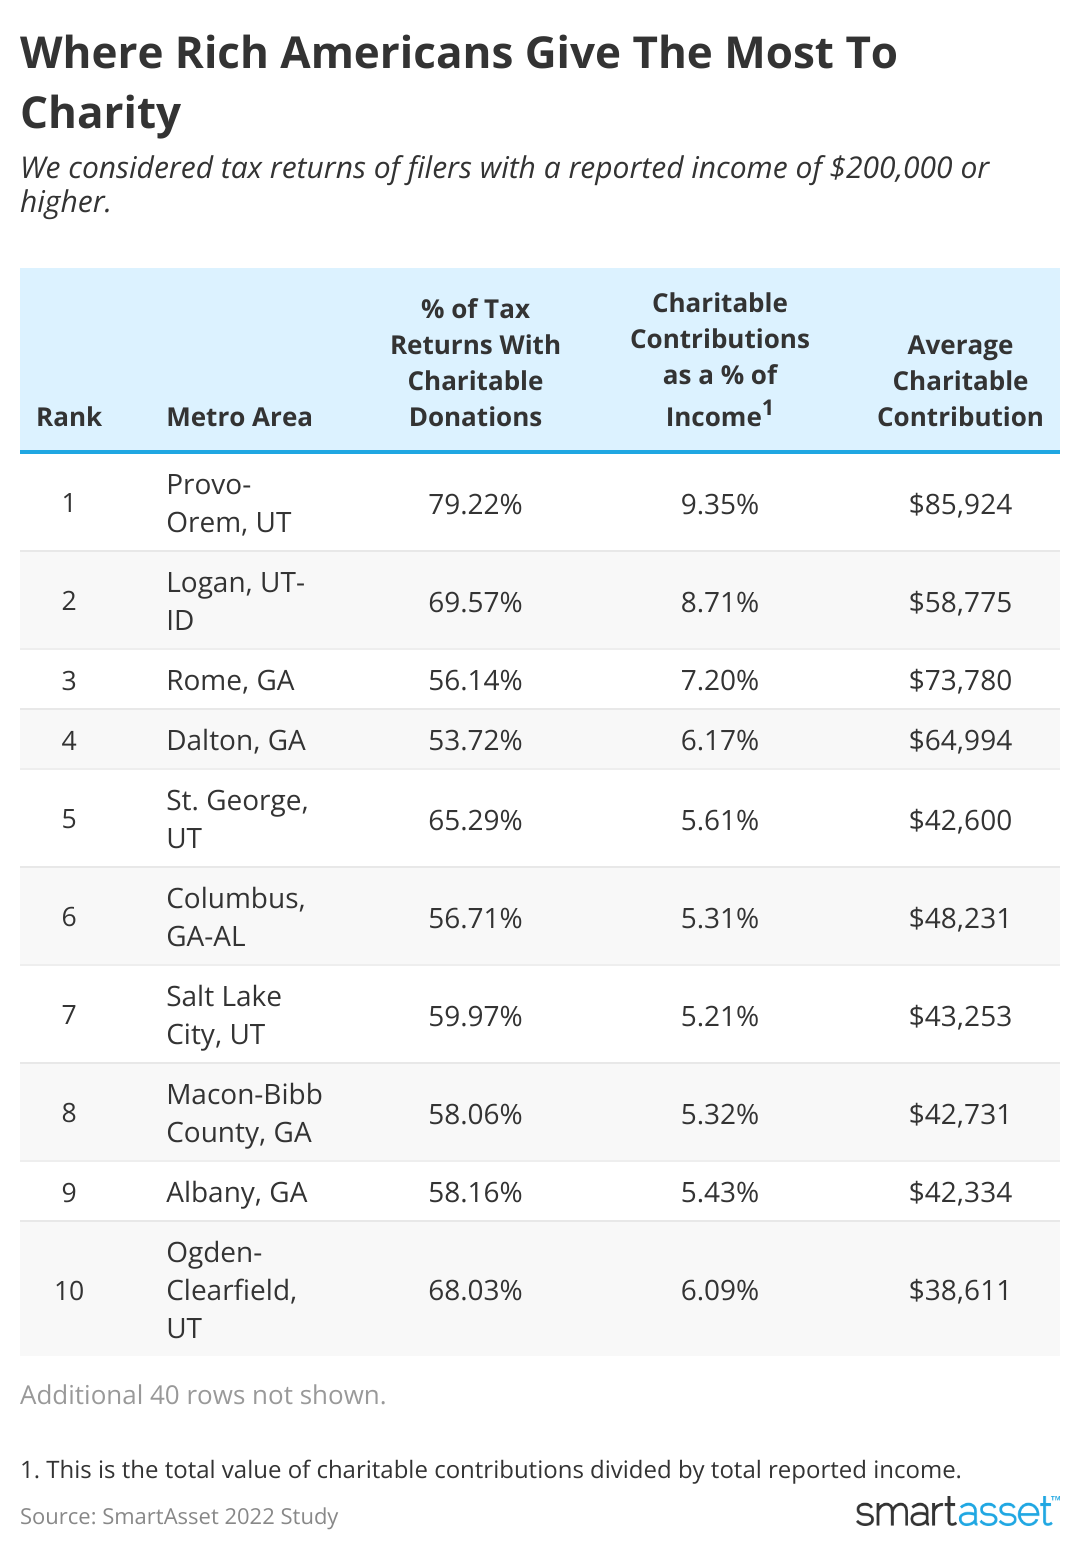 A table presents a ranking of 10 metro areas where tax filers with a reported income of $200,000 or more give the most charitable contributions.